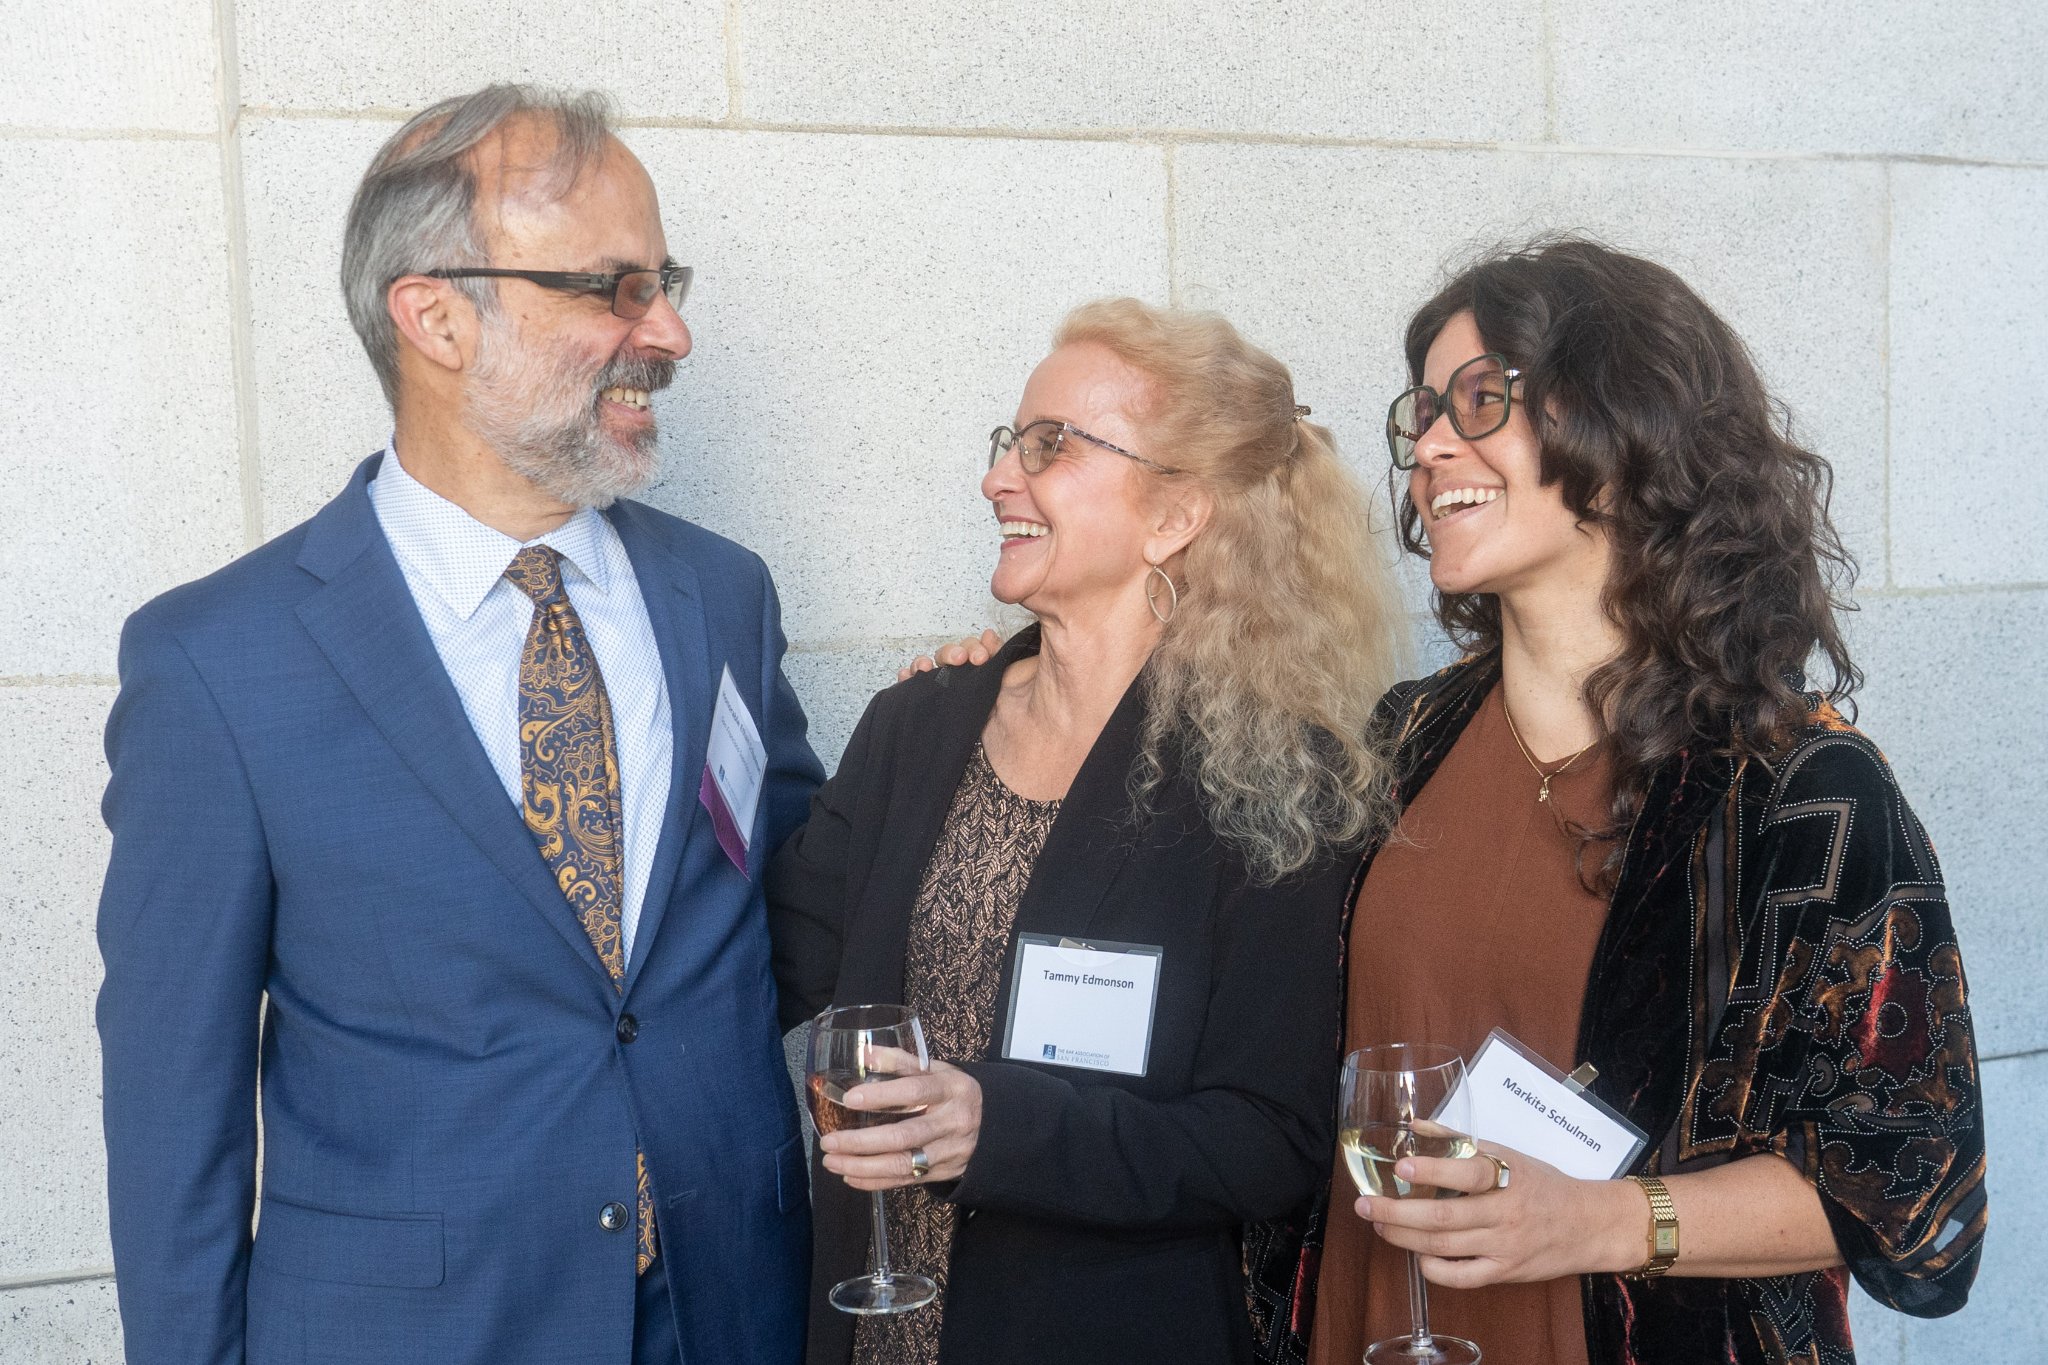 Judge Ethan P. Schulman with his wife, Tammy Edmonson, and daughter, Markita Schulman / Photo by Jim Block